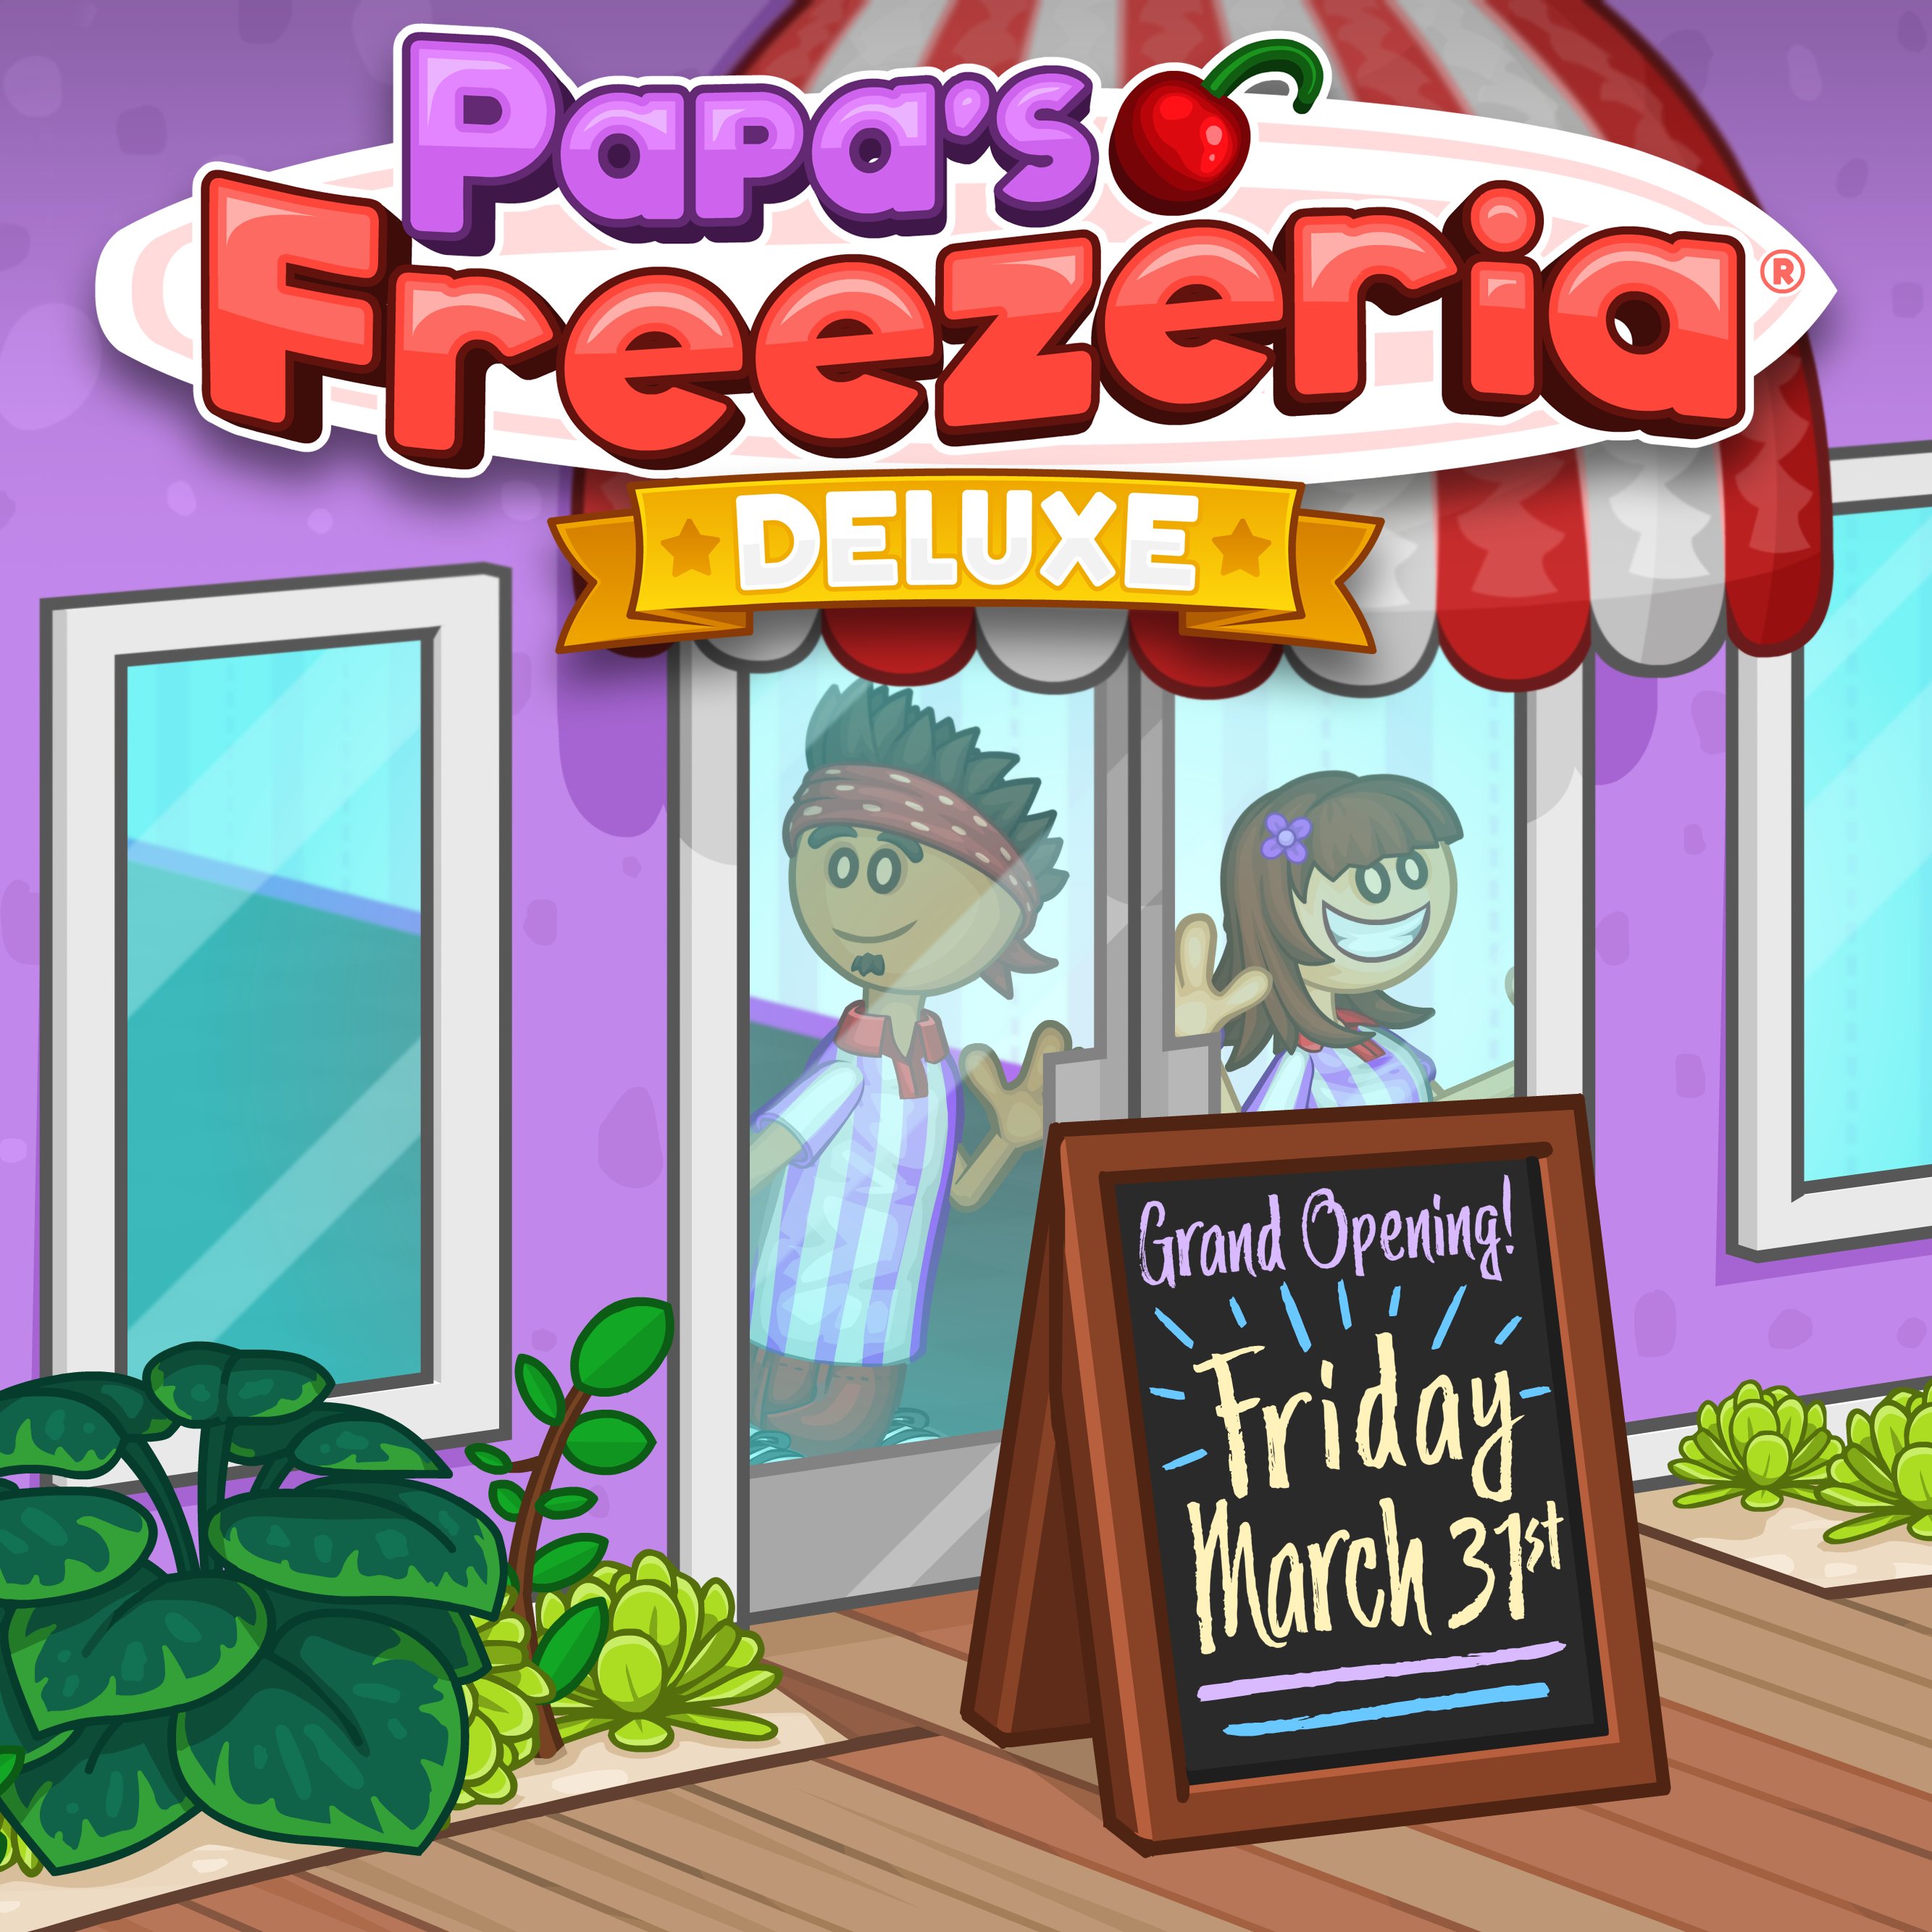 They working for Papa Louie now 💀 (Papa's Freezeria Deluxe) :  r/BocchiTheRock